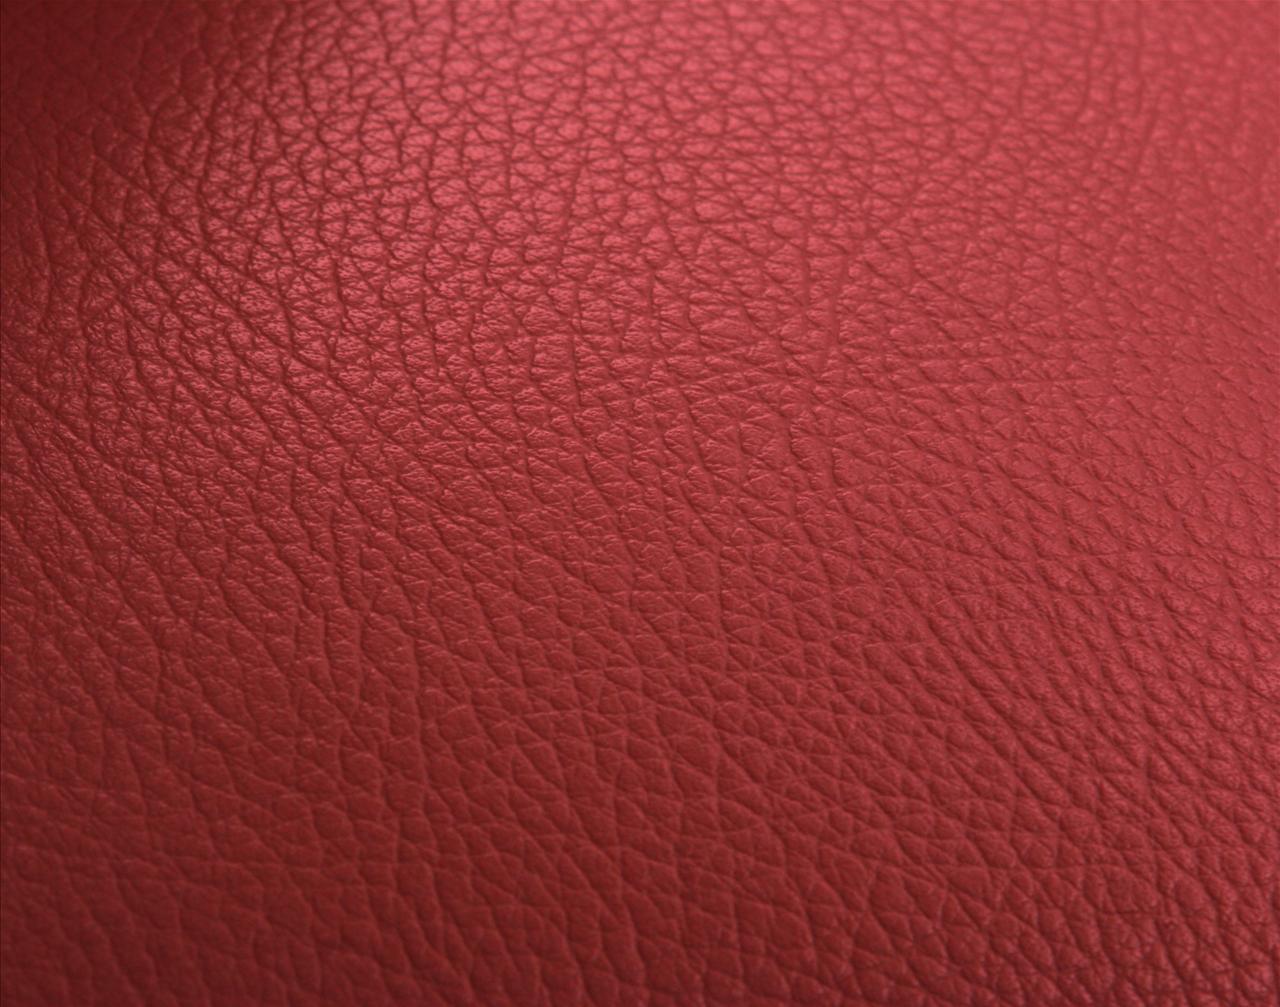 red leather textures Backgrounds